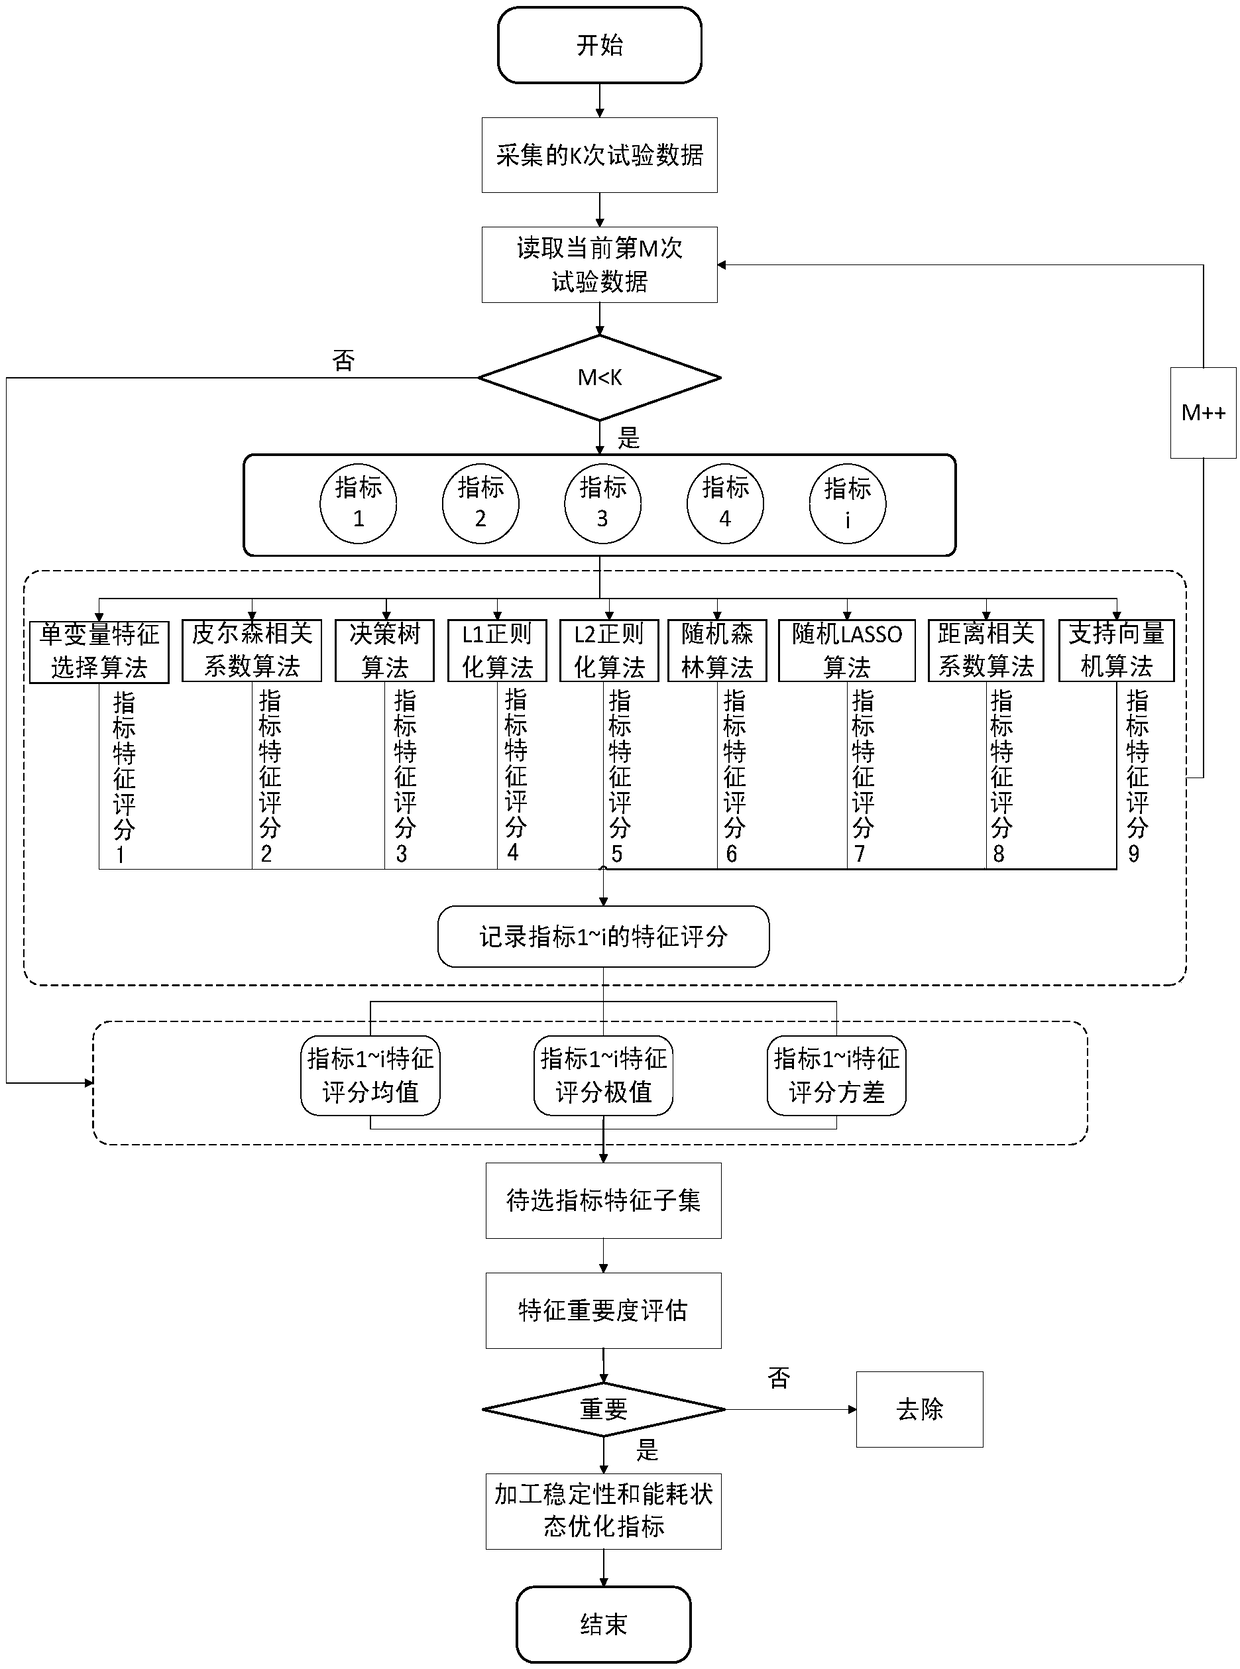 Electric spark machining stability and energy consumption state optimization decision-making system and method based on deep learning